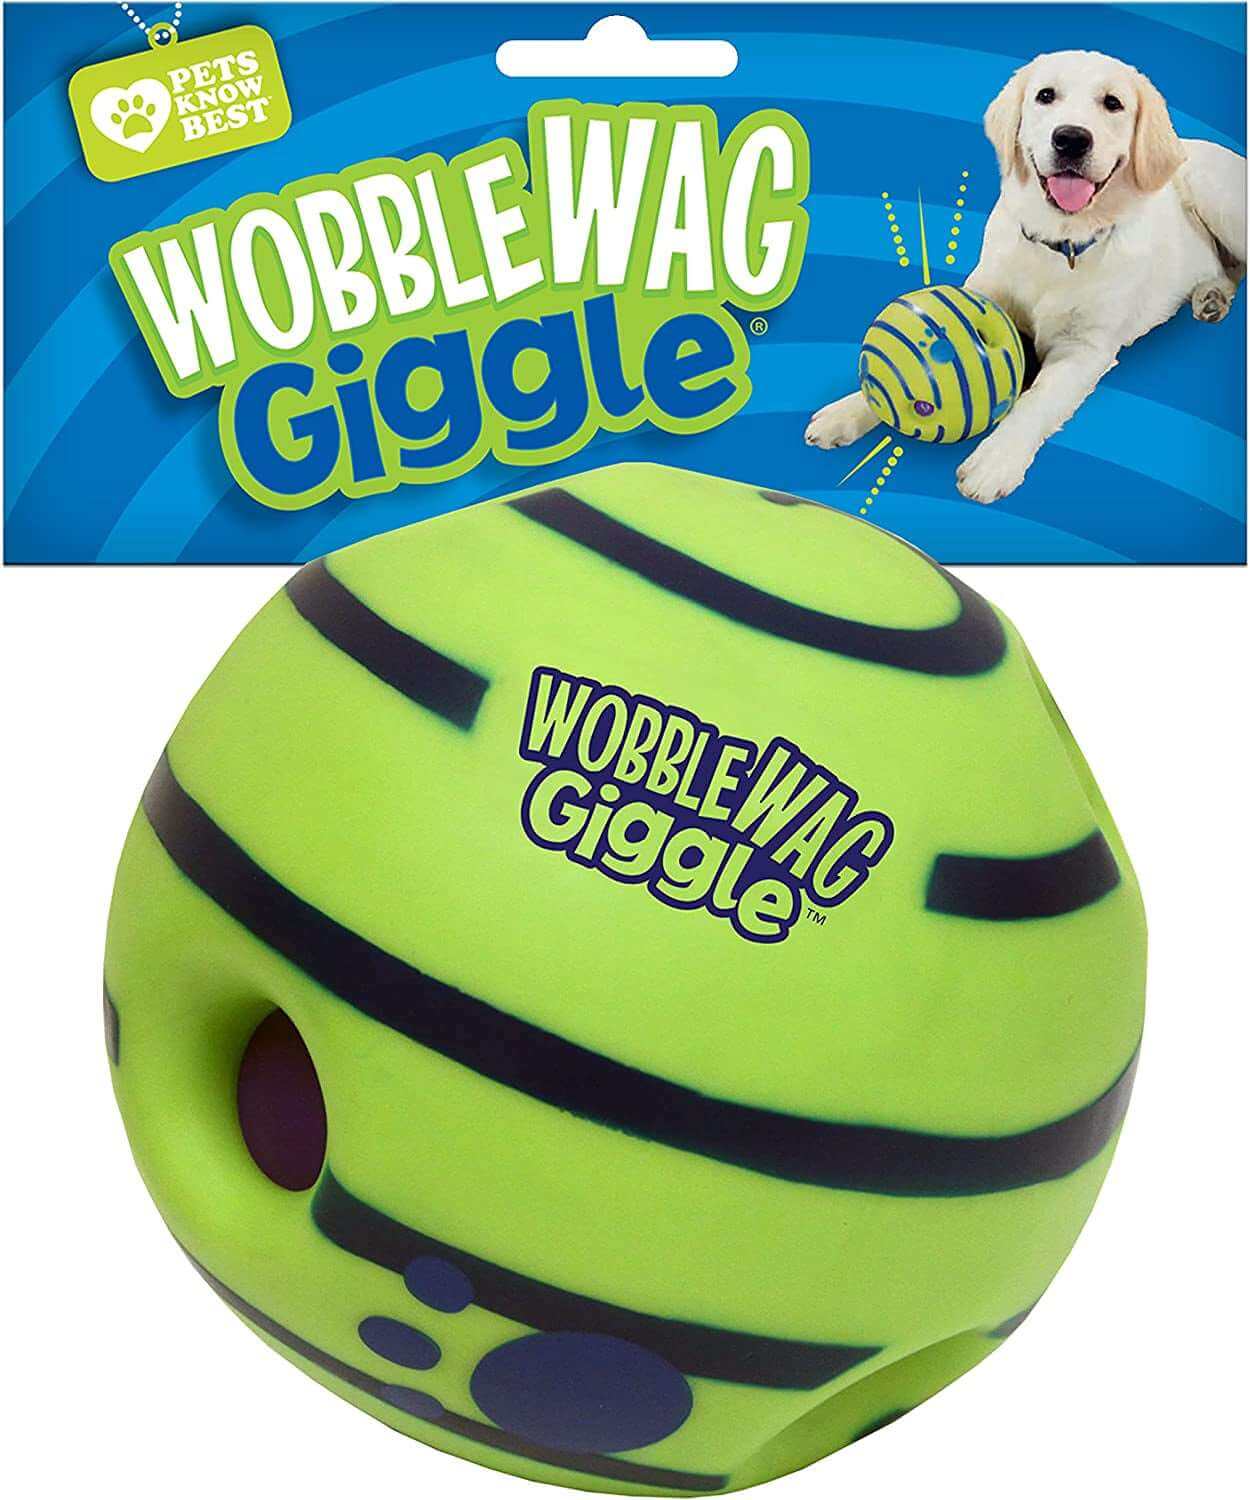 Interactive Dog Toy with Fun Giggle Sounds - Wobble Wag Giggle Ball